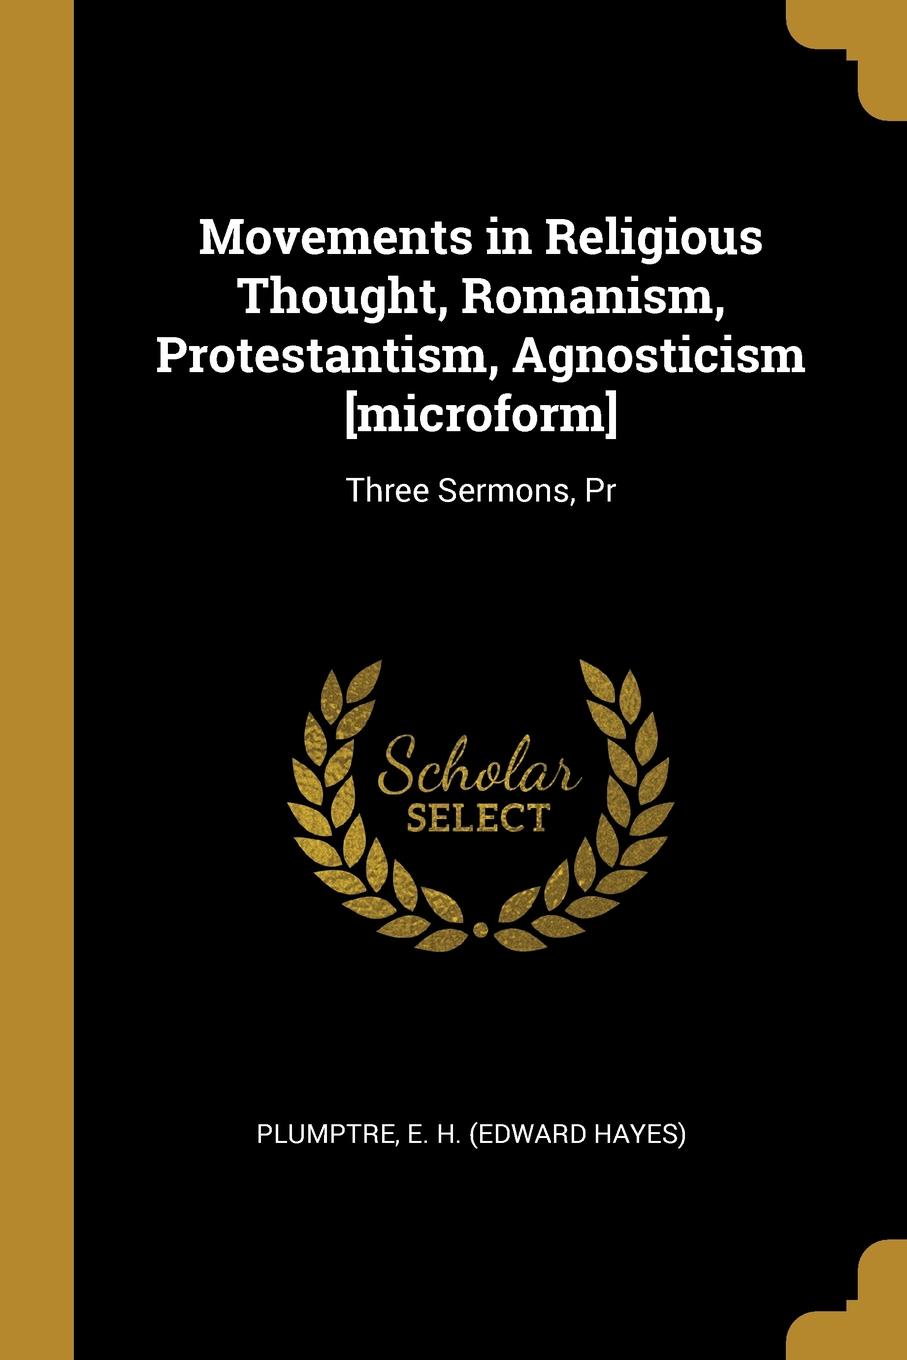 Movements in Religious Thought, Romanism, Protestantism, Agnosticism .microform.. Three Sermons, Pr